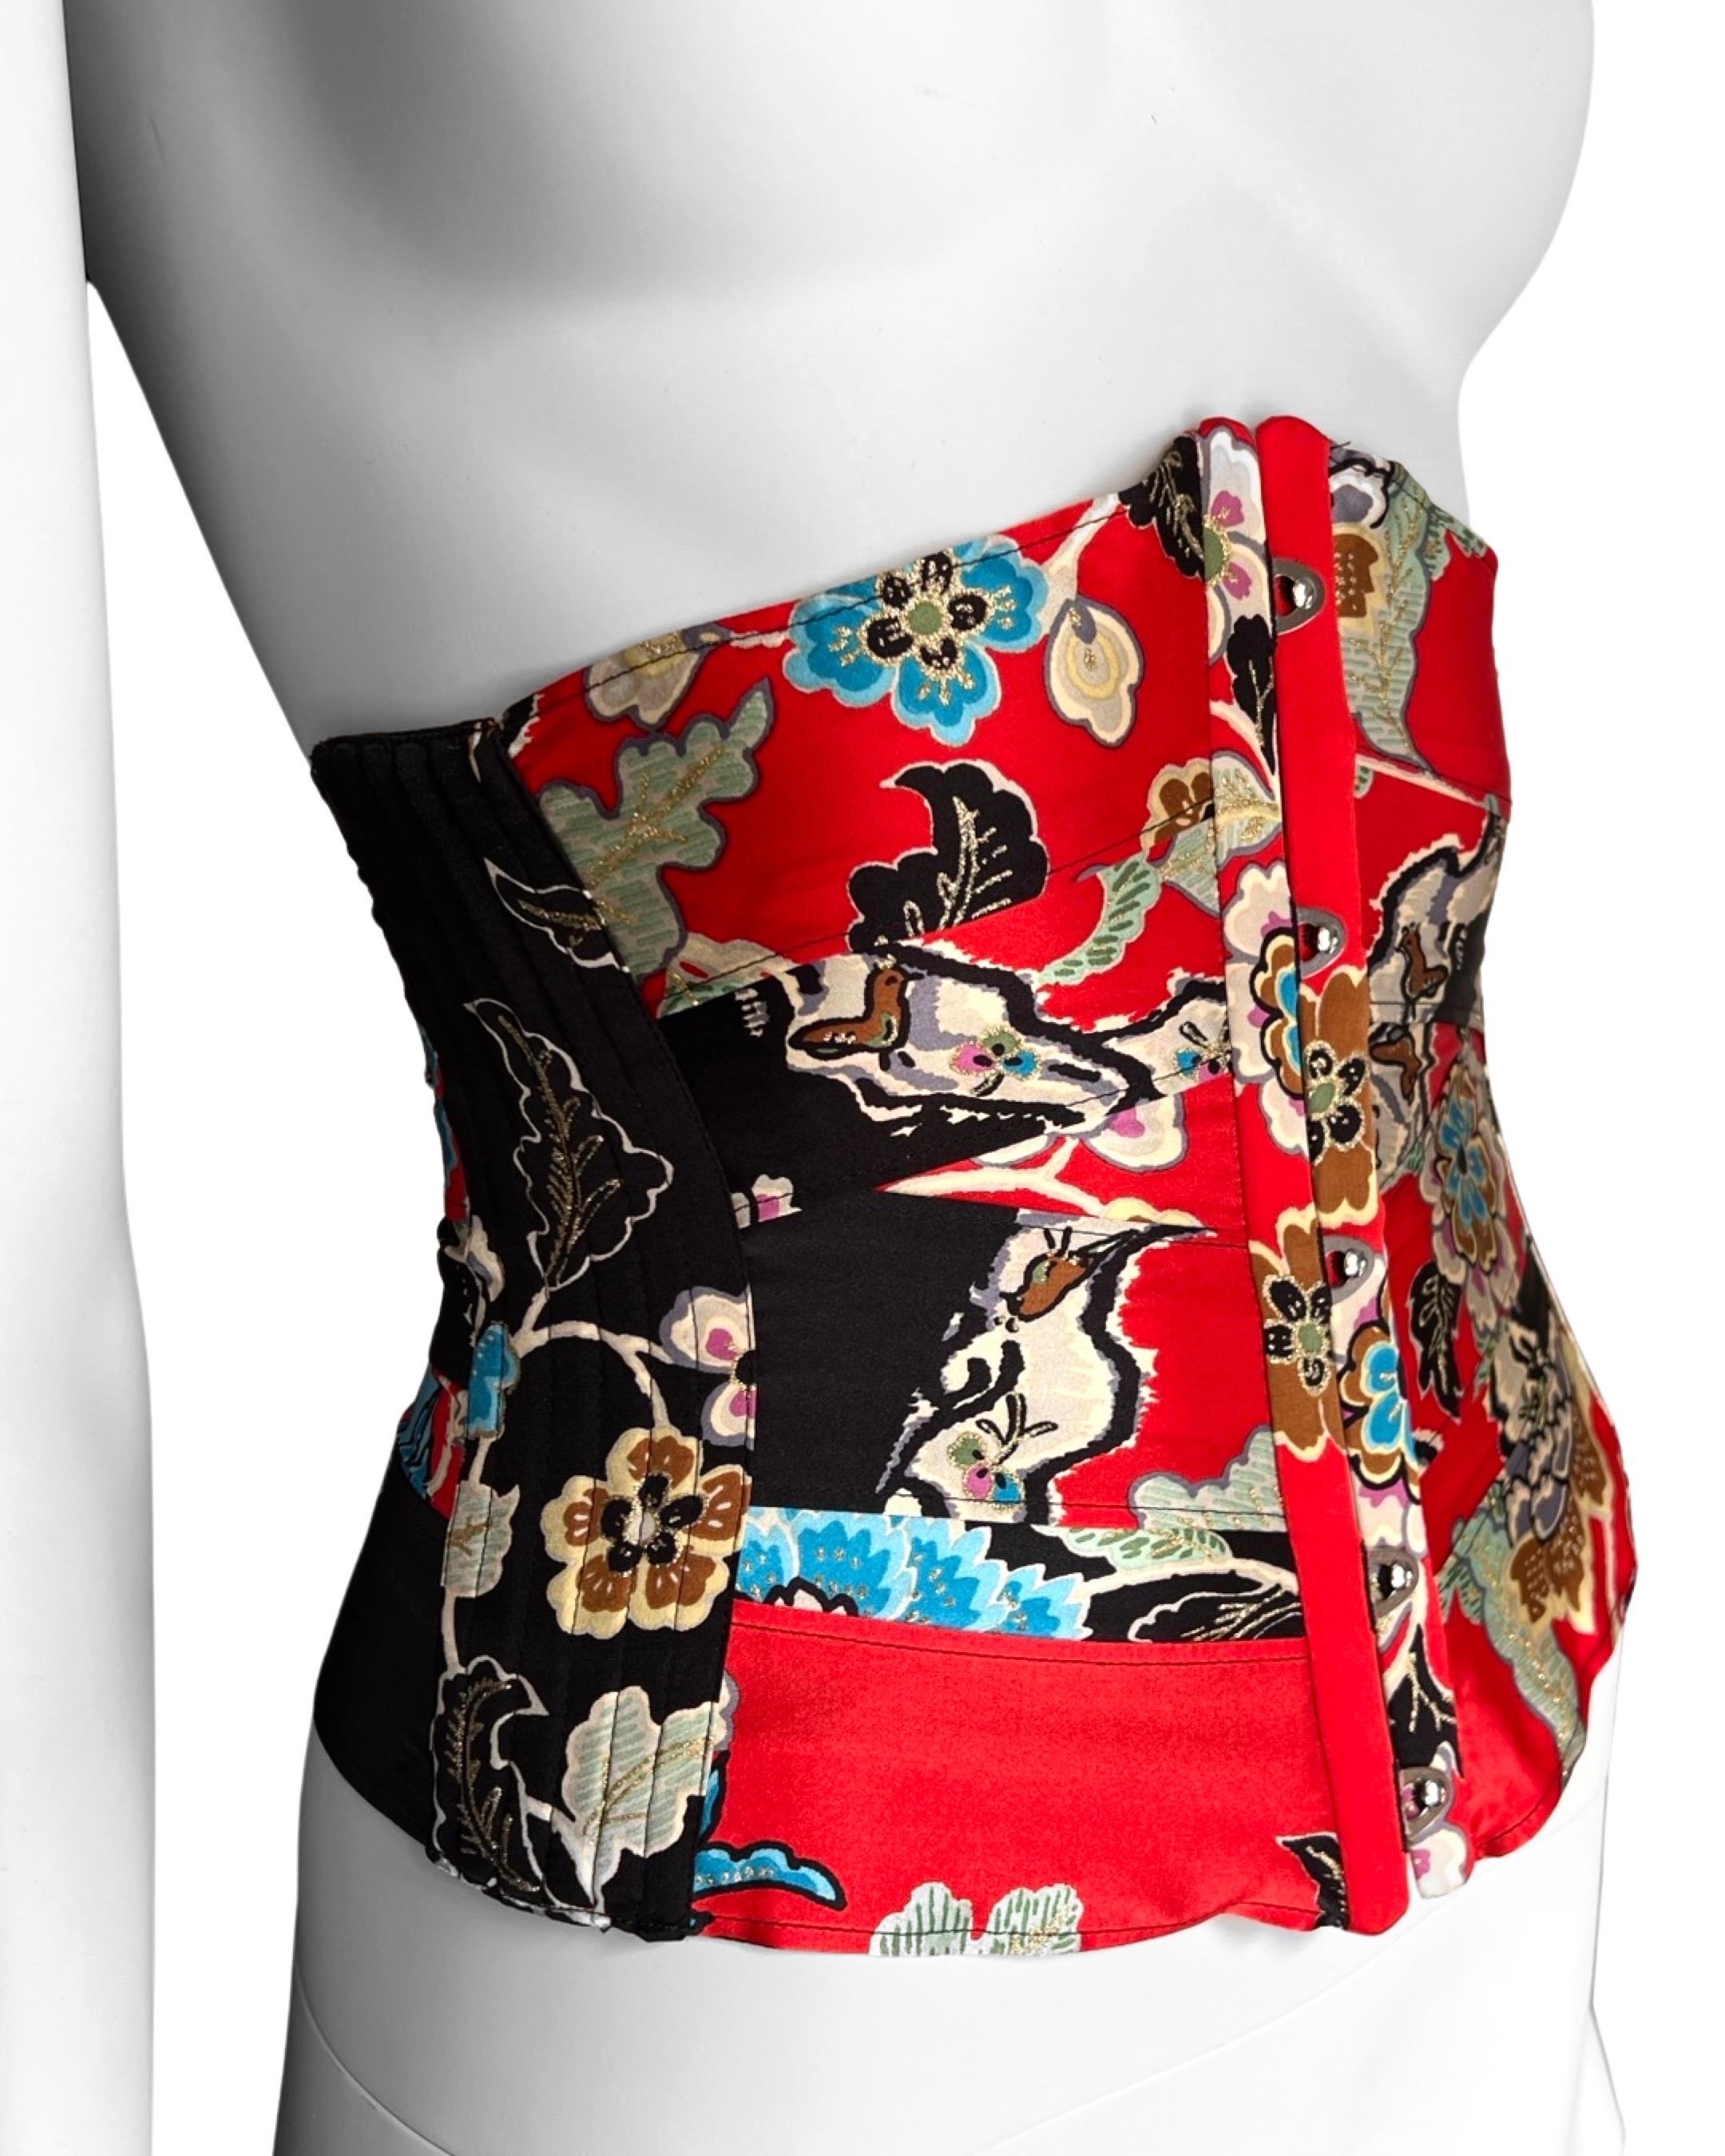 An incredibly gorgeous 100% genuine silk waist cincher from the most iconic Roberto Cavalli collection, Spring 2003, highly documented and seen on many celebrities, runway and ad campaign.

Size Small, waist width (flat lay on one side) - 30 cm (12